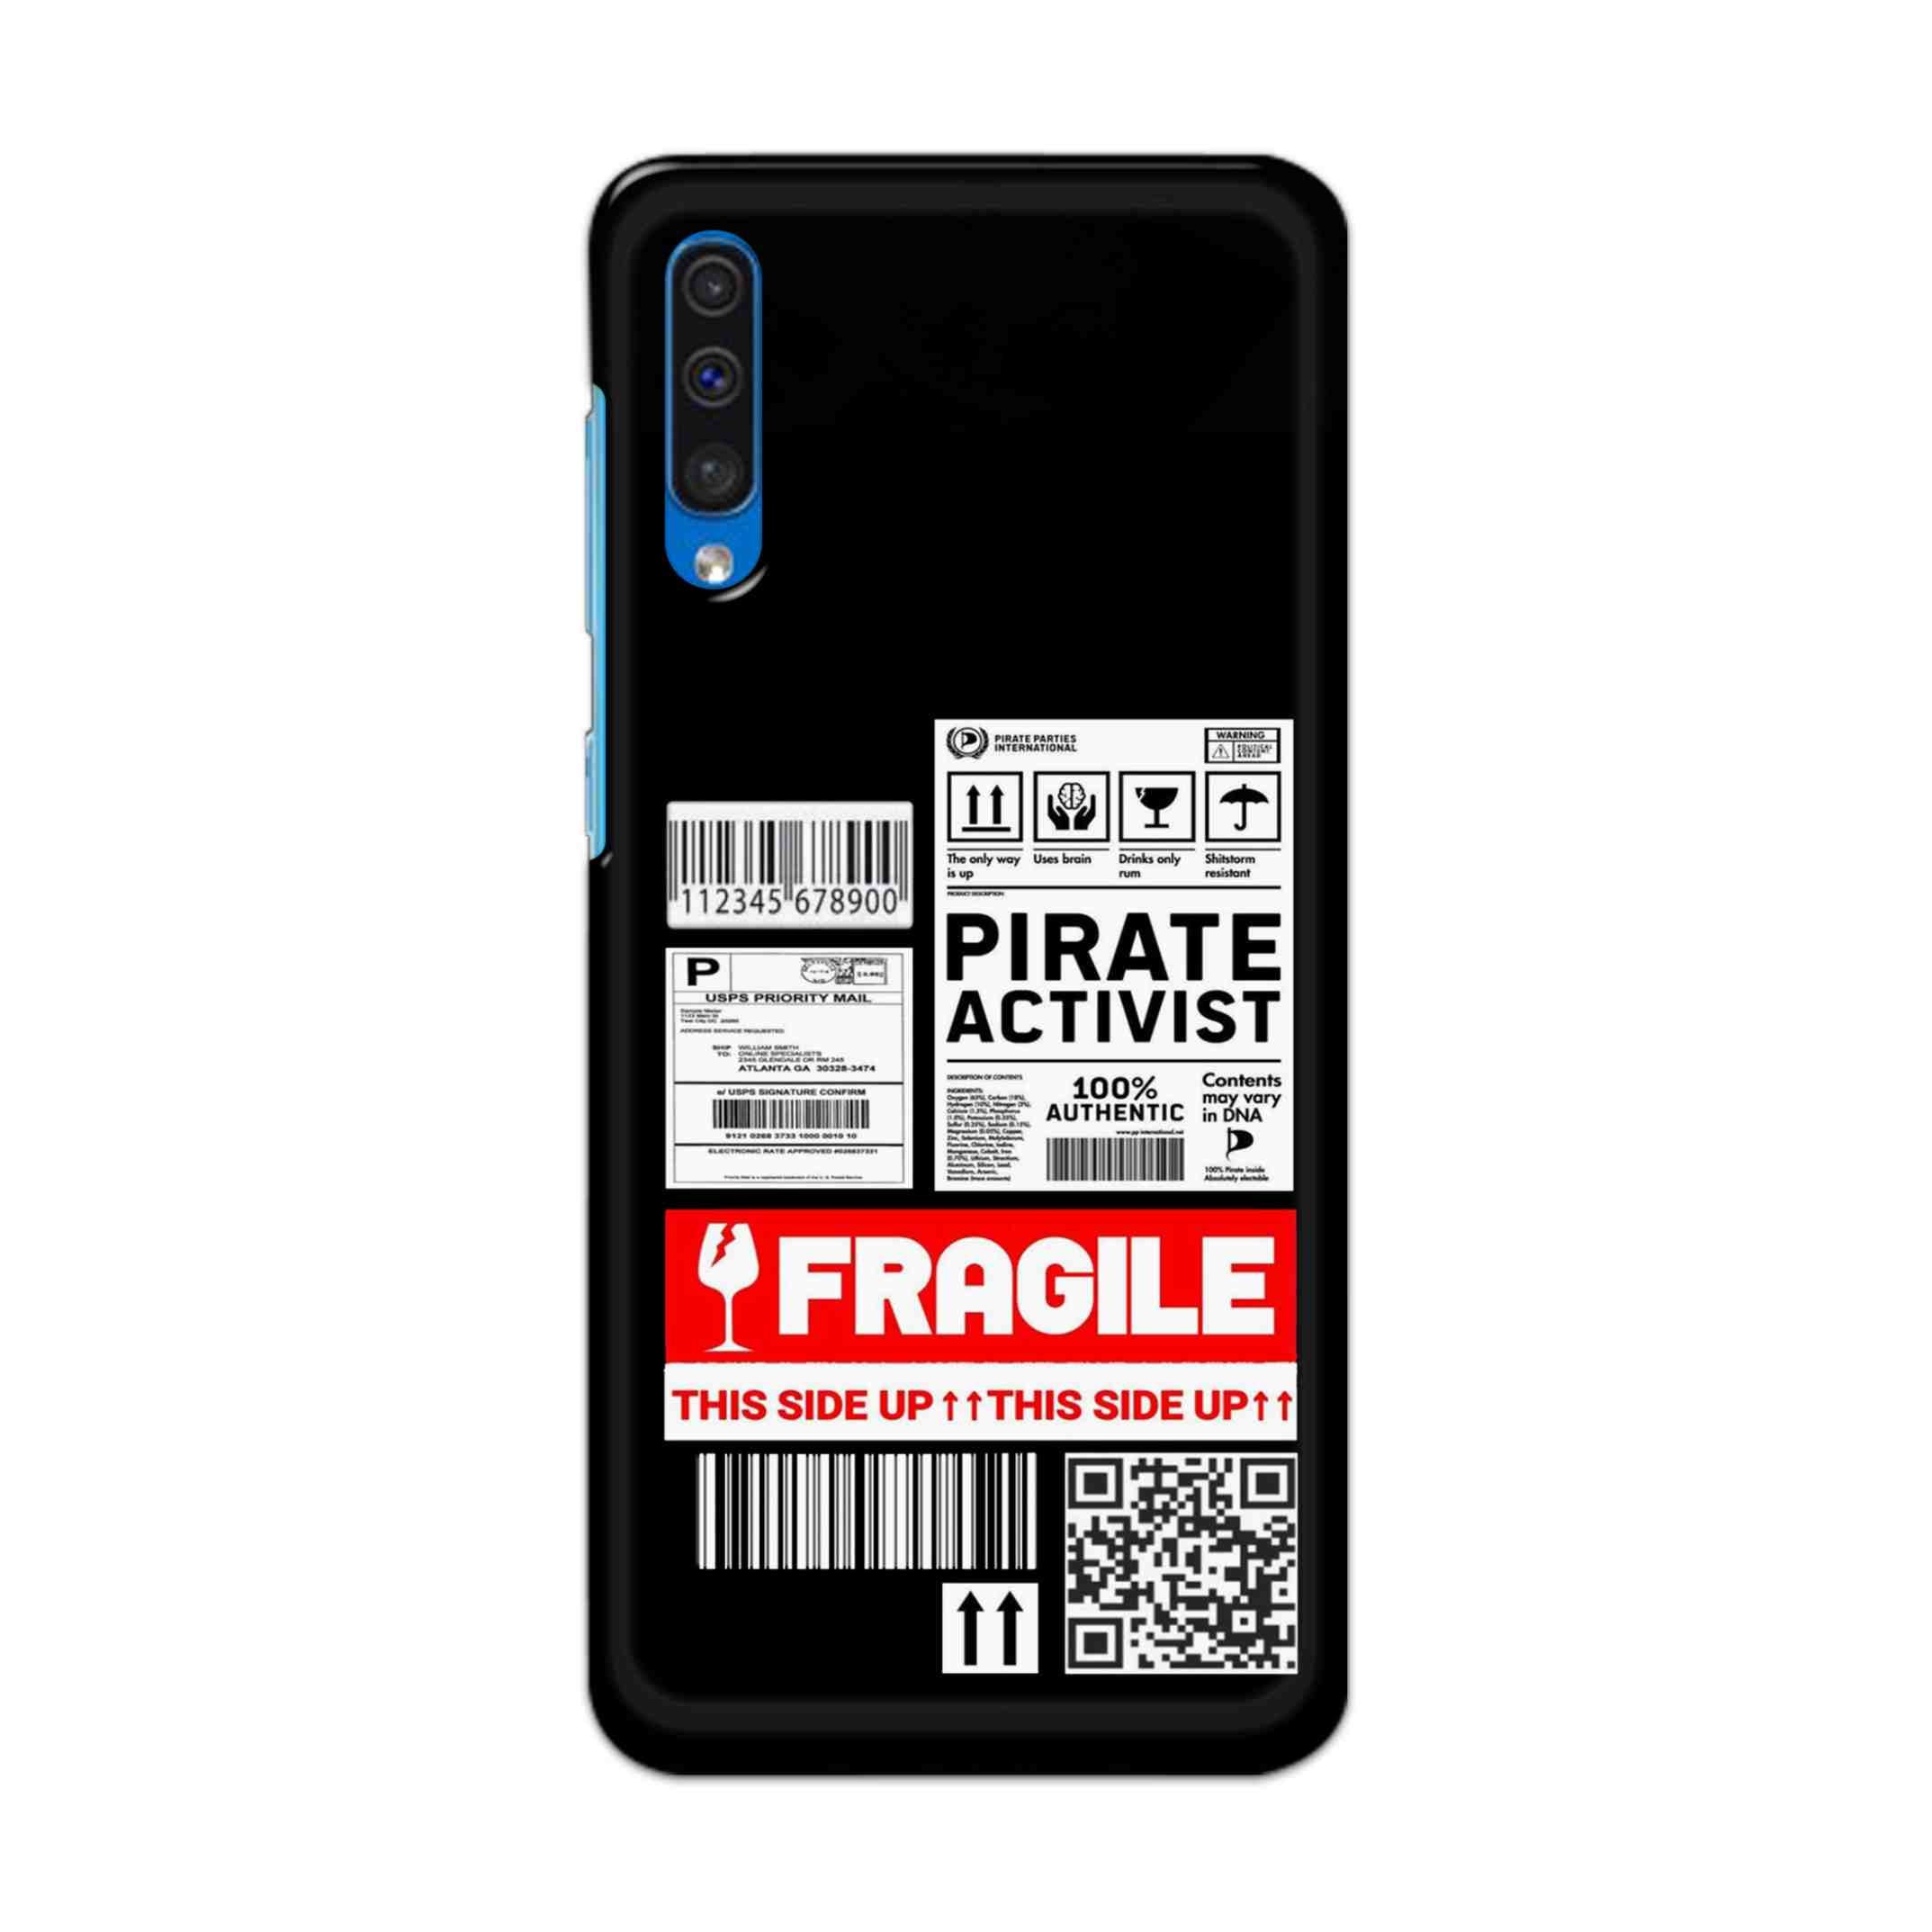 Buy Fragile Hard Back Mobile Phone Case Cover For Samsung Galaxy A50 / A50s / A30s Online